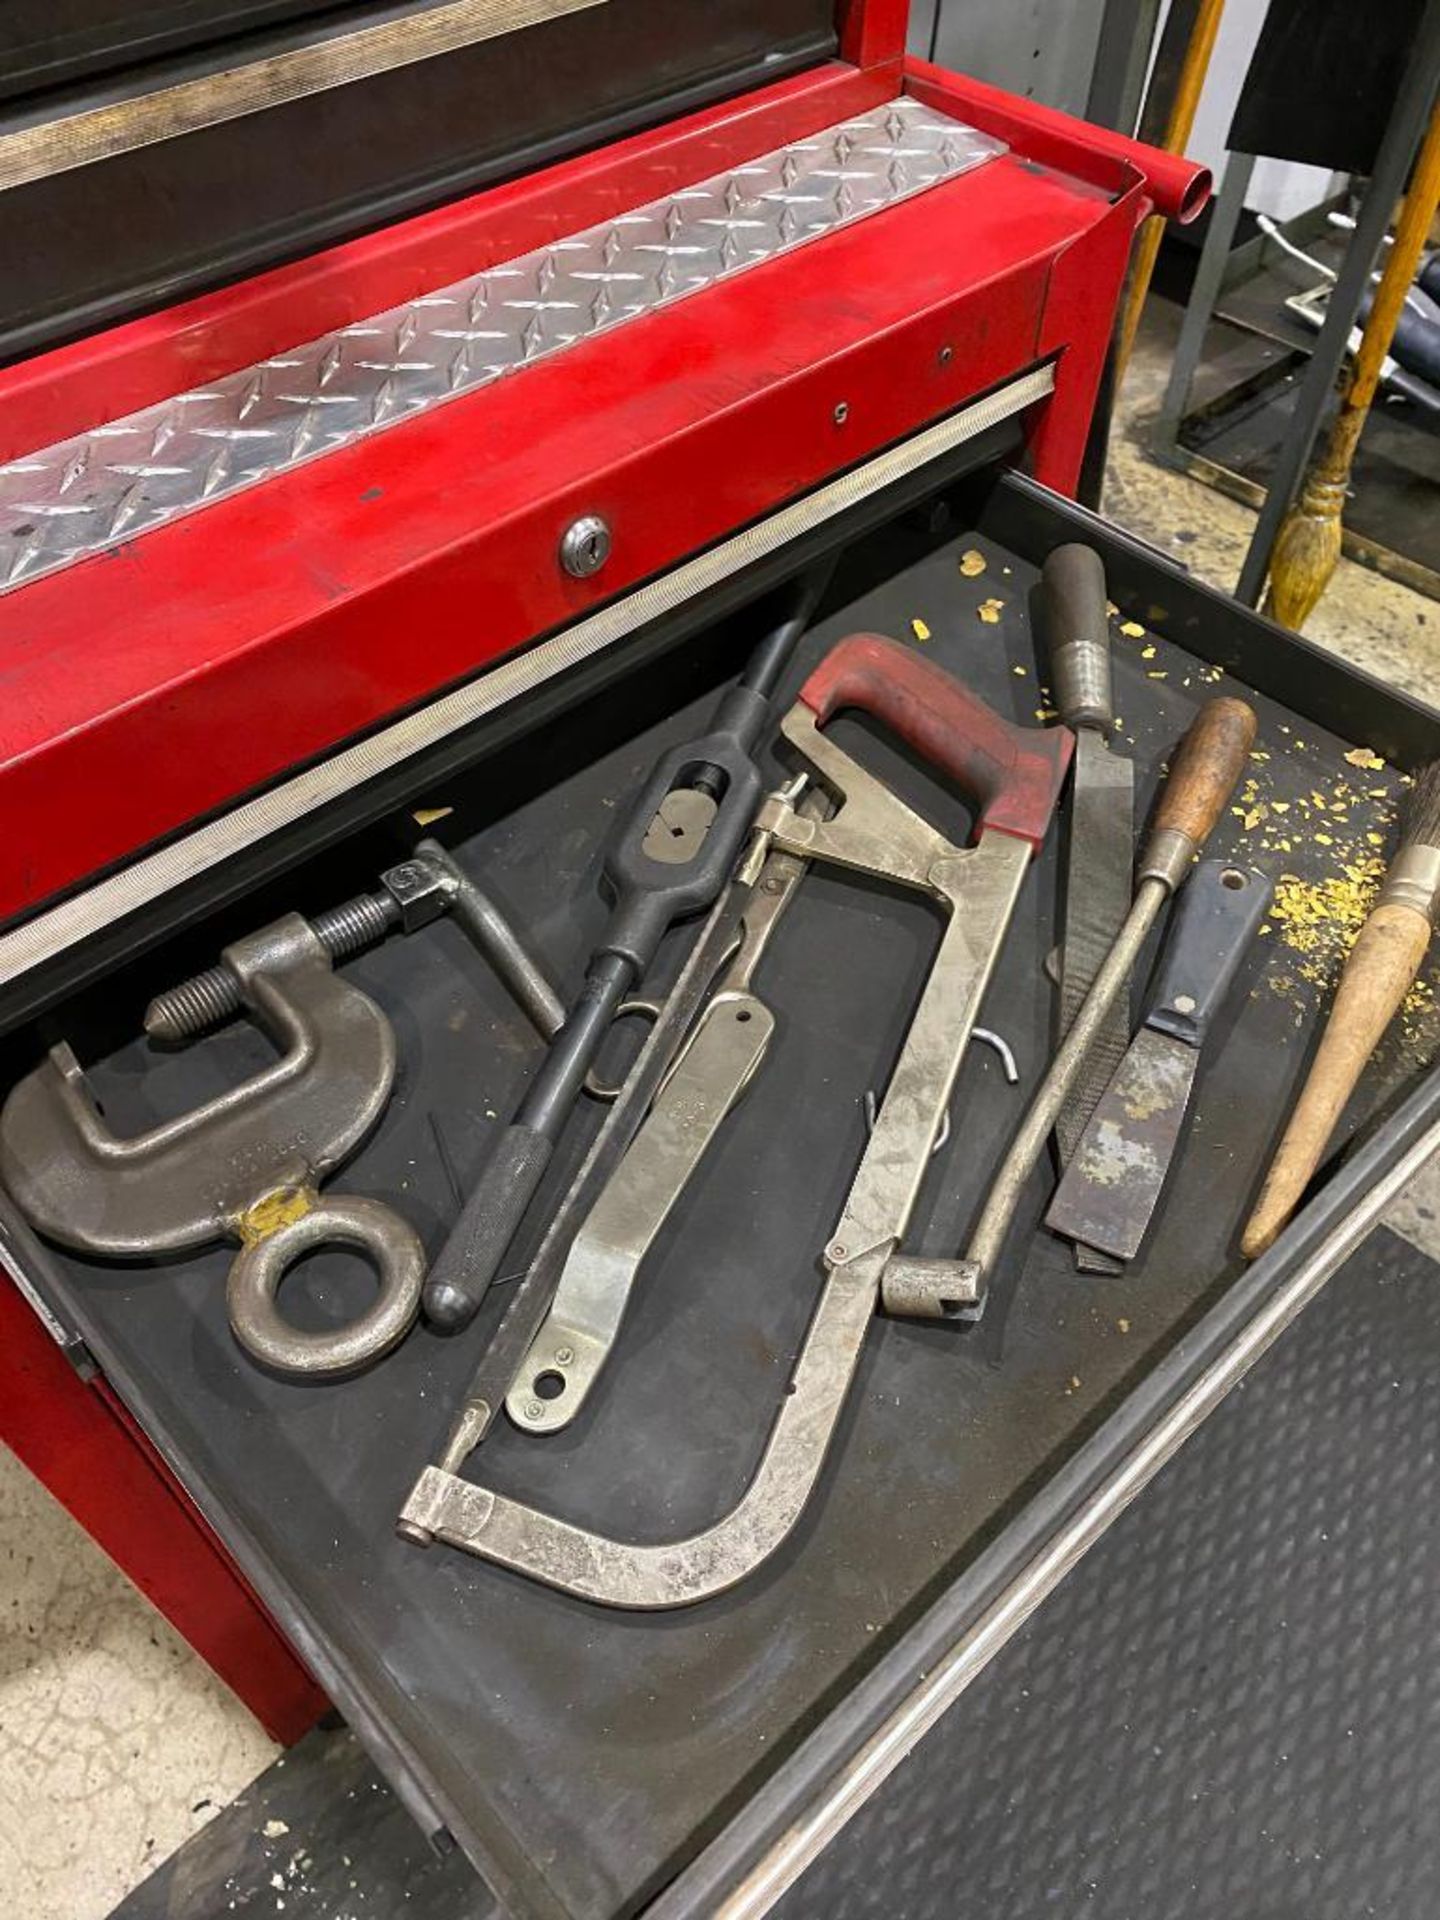 CRAFTSMAN ROLLING TOOLBOX, CONTENTS OF ASSORTED HAND TOOLS - Image 6 of 8